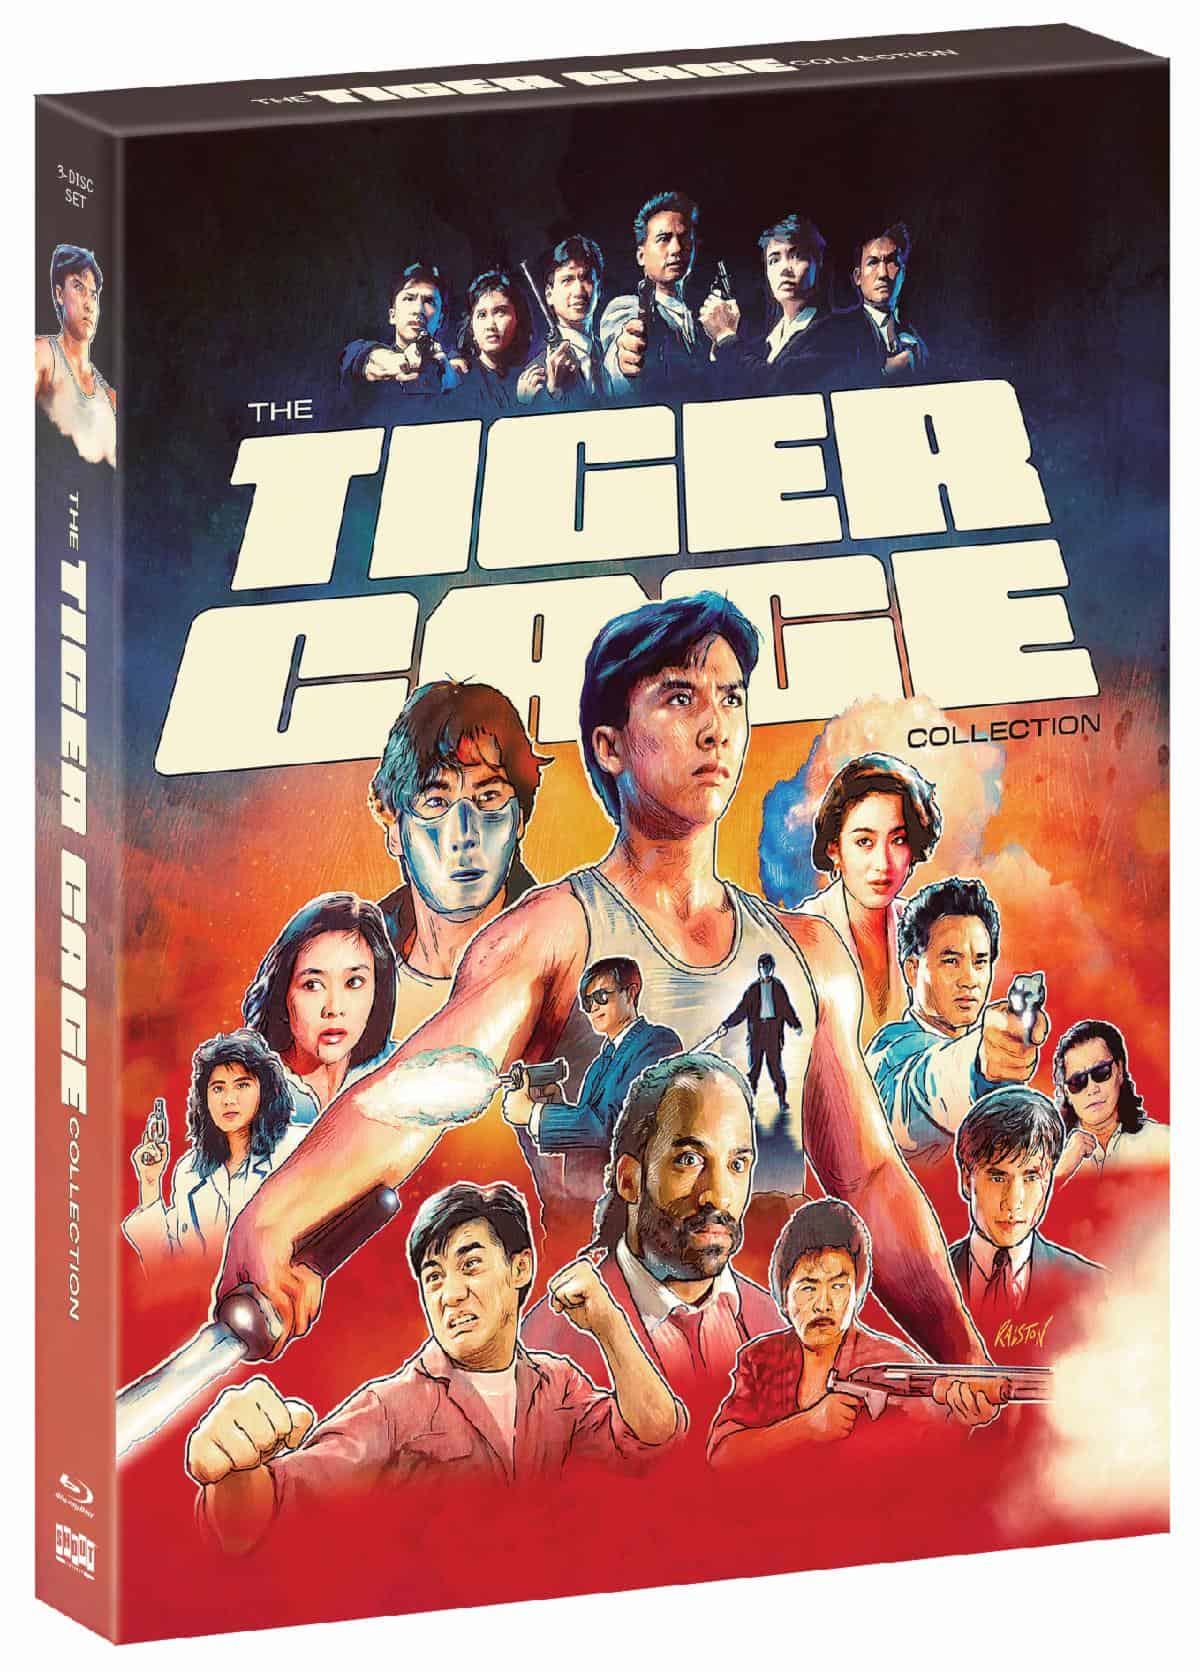 The Tiger Cage Collection hits Blu-ray on May 9th from Shout! 27